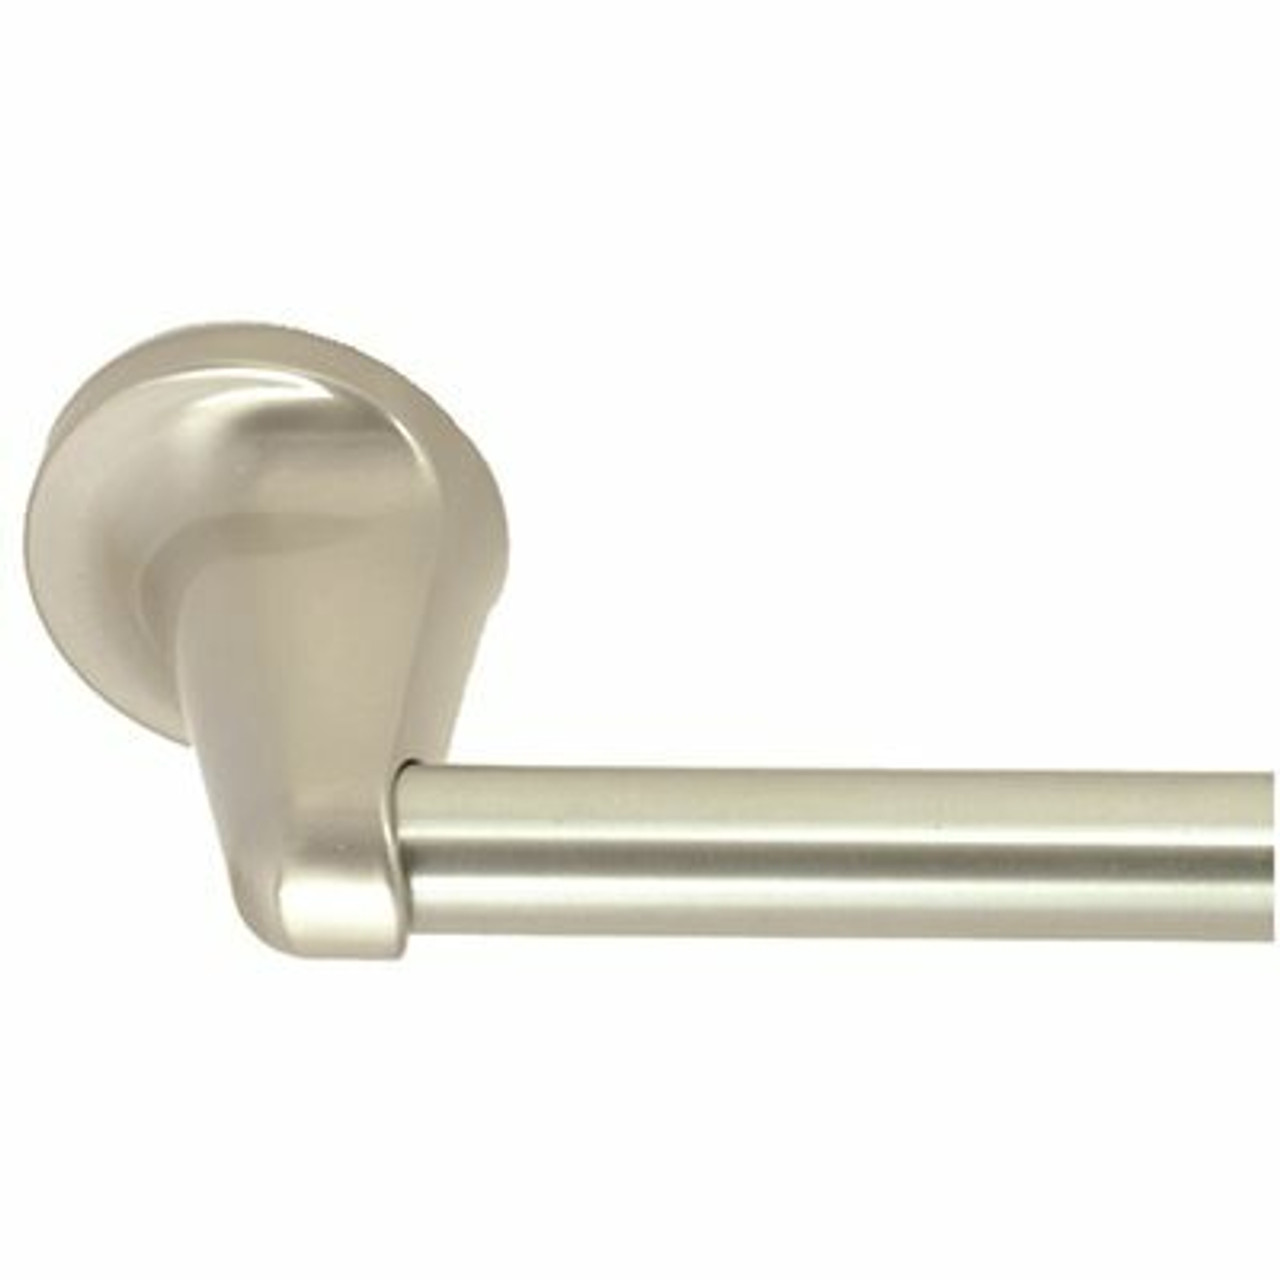 Better Home Products Soma Towel Bar 24 In. Satin Nickel